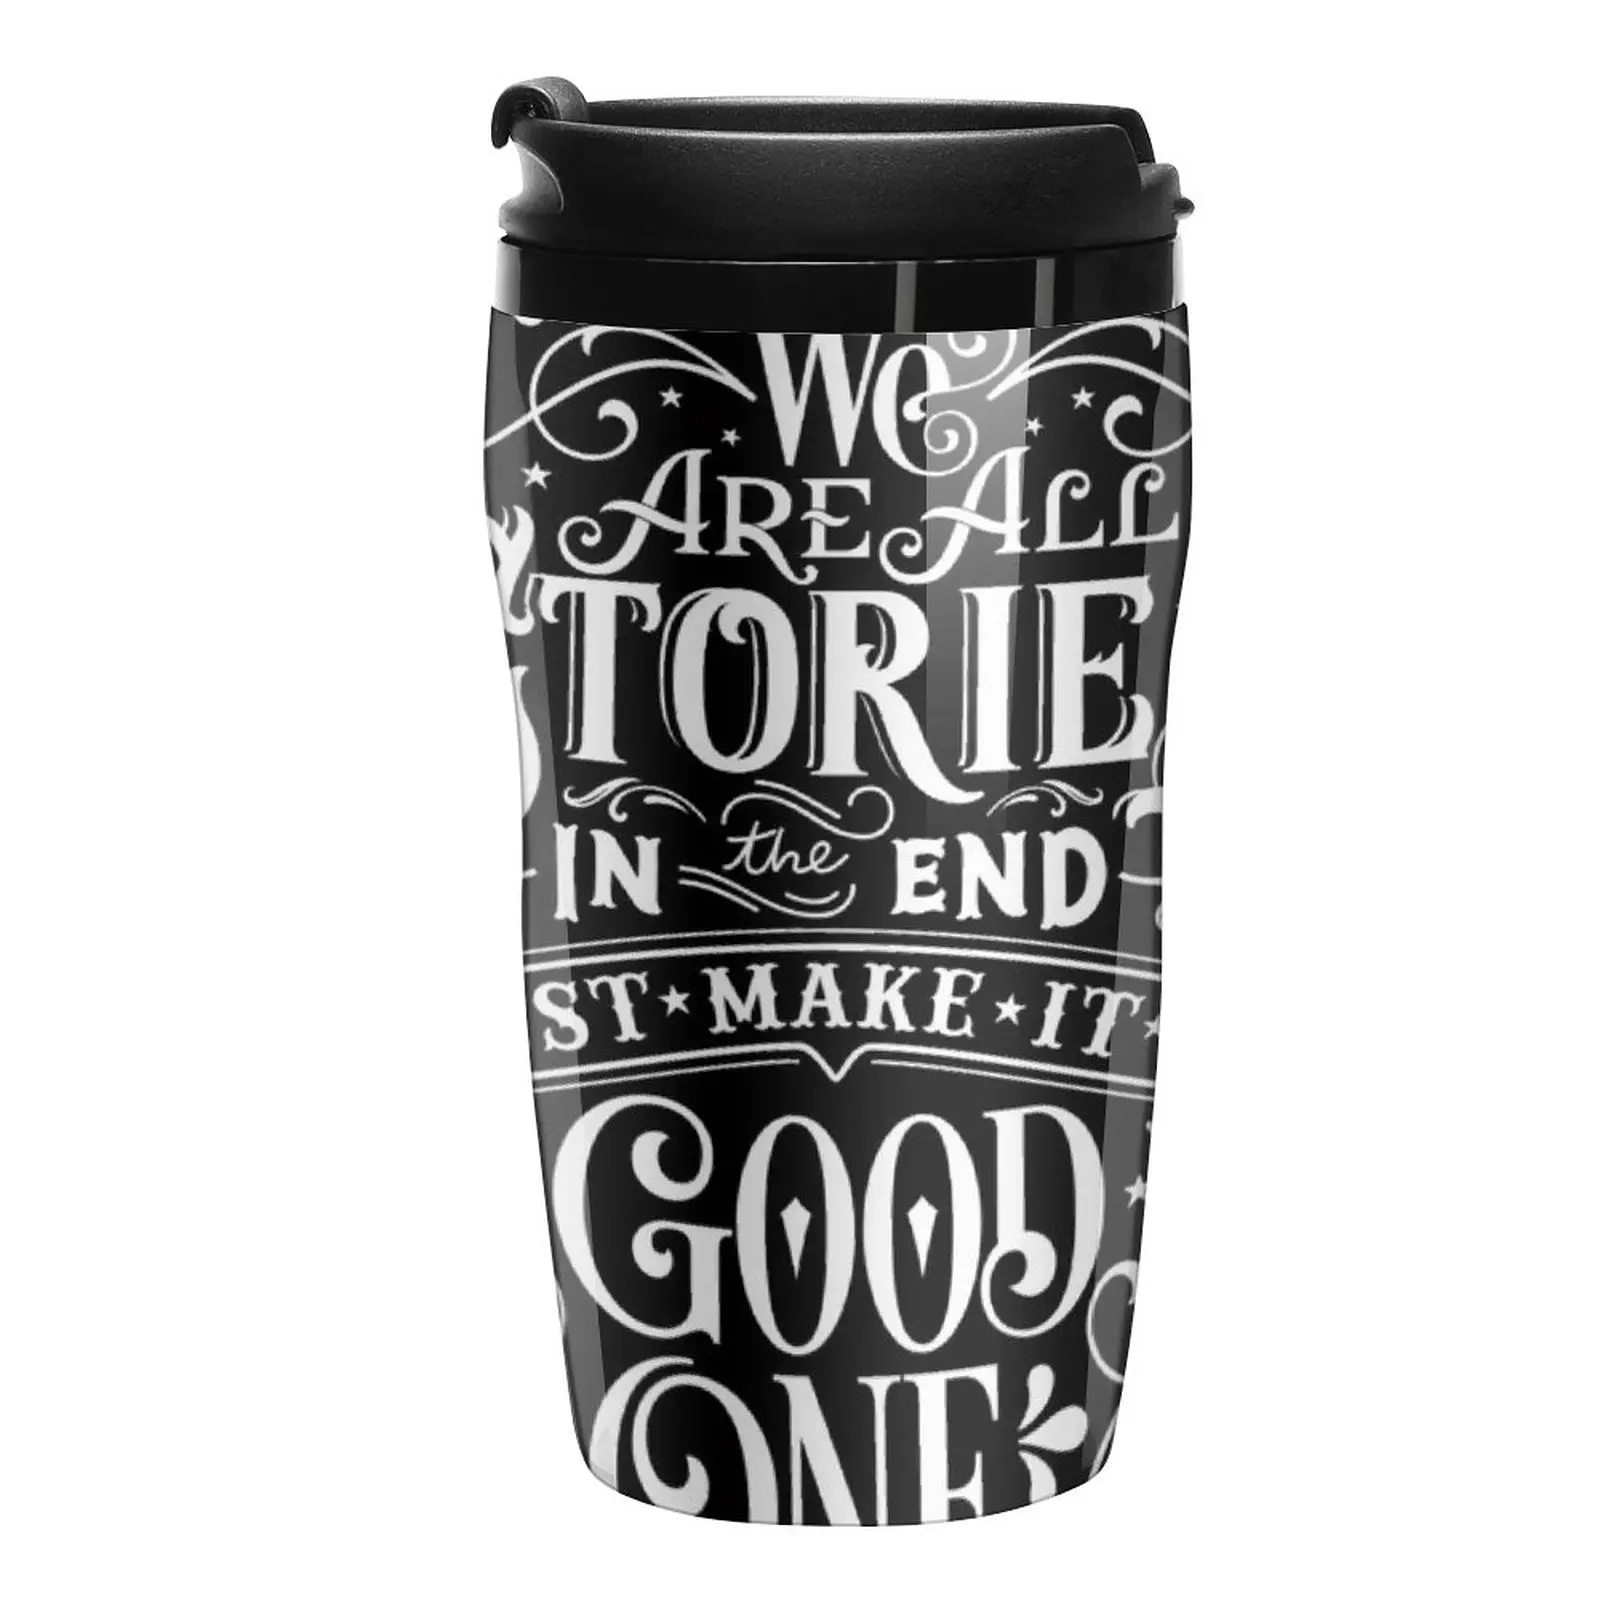 

New We Are All Stories In The End. Travel Coffee Mug Cups For Coffee Coffee Cup Heat Preservation Beautiful Tea Mugs